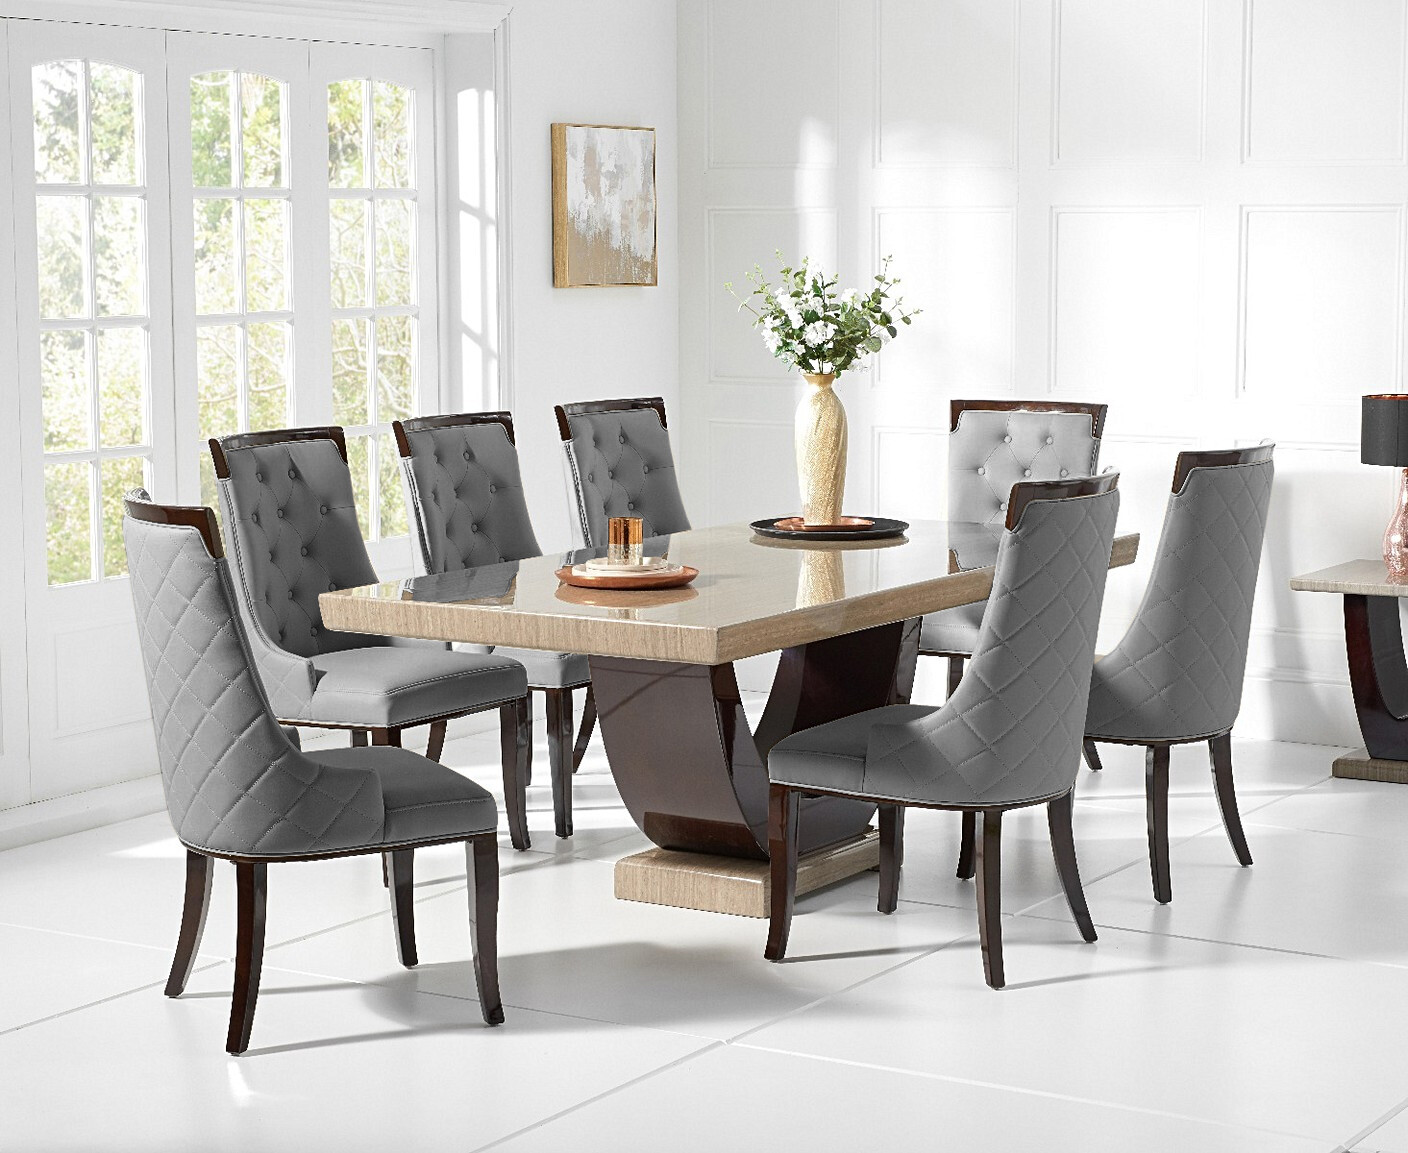 Photo 3 of Novara 200cm brown pedestal marble dining table with 8 grey francesca chairs